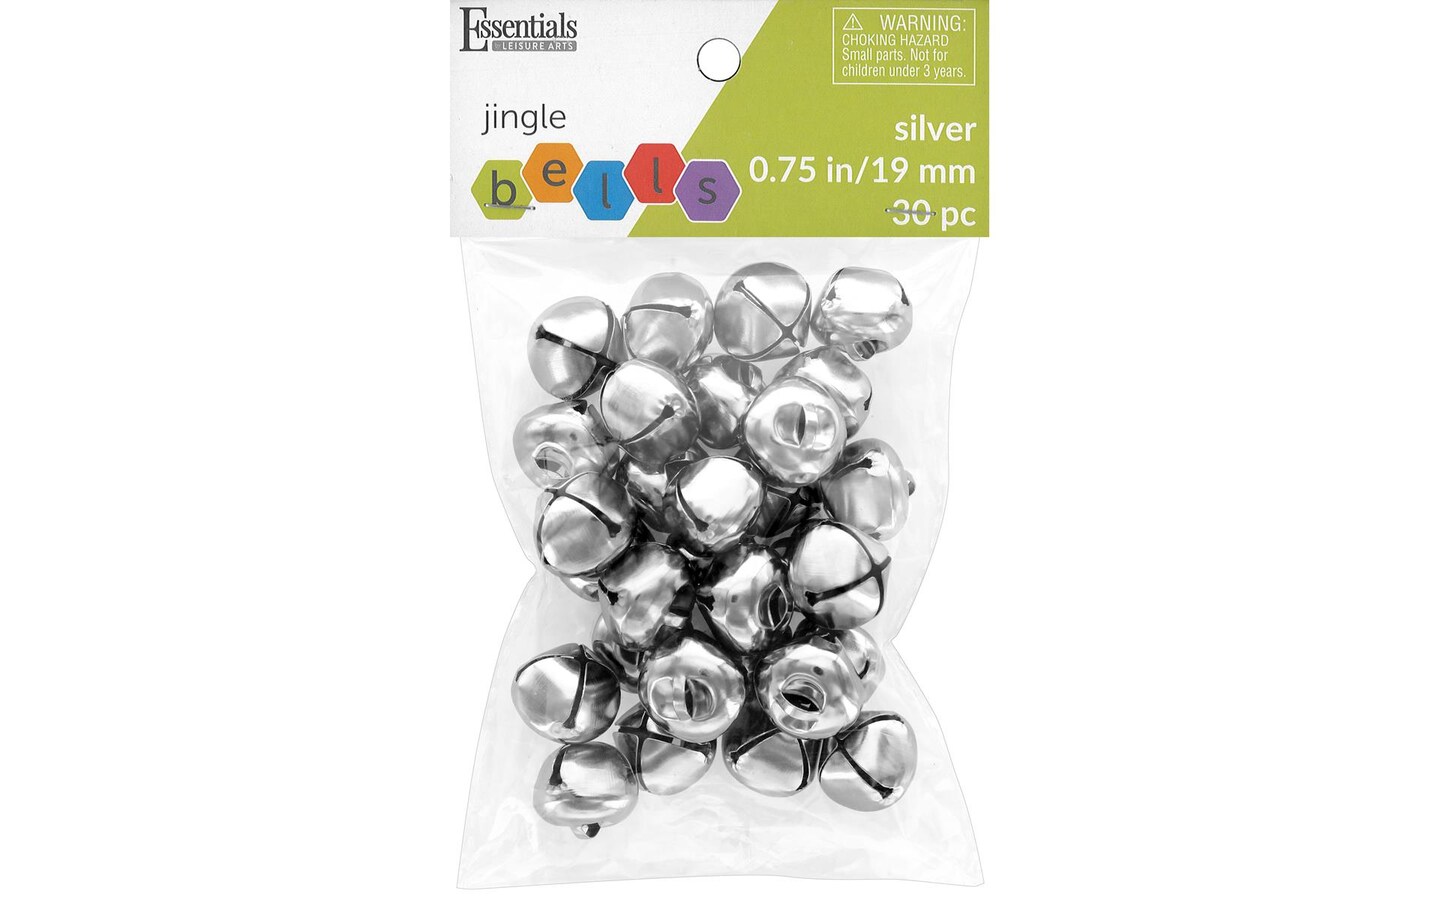 Essentials by Leisure Jingle Bells 9mm Gold 72pc